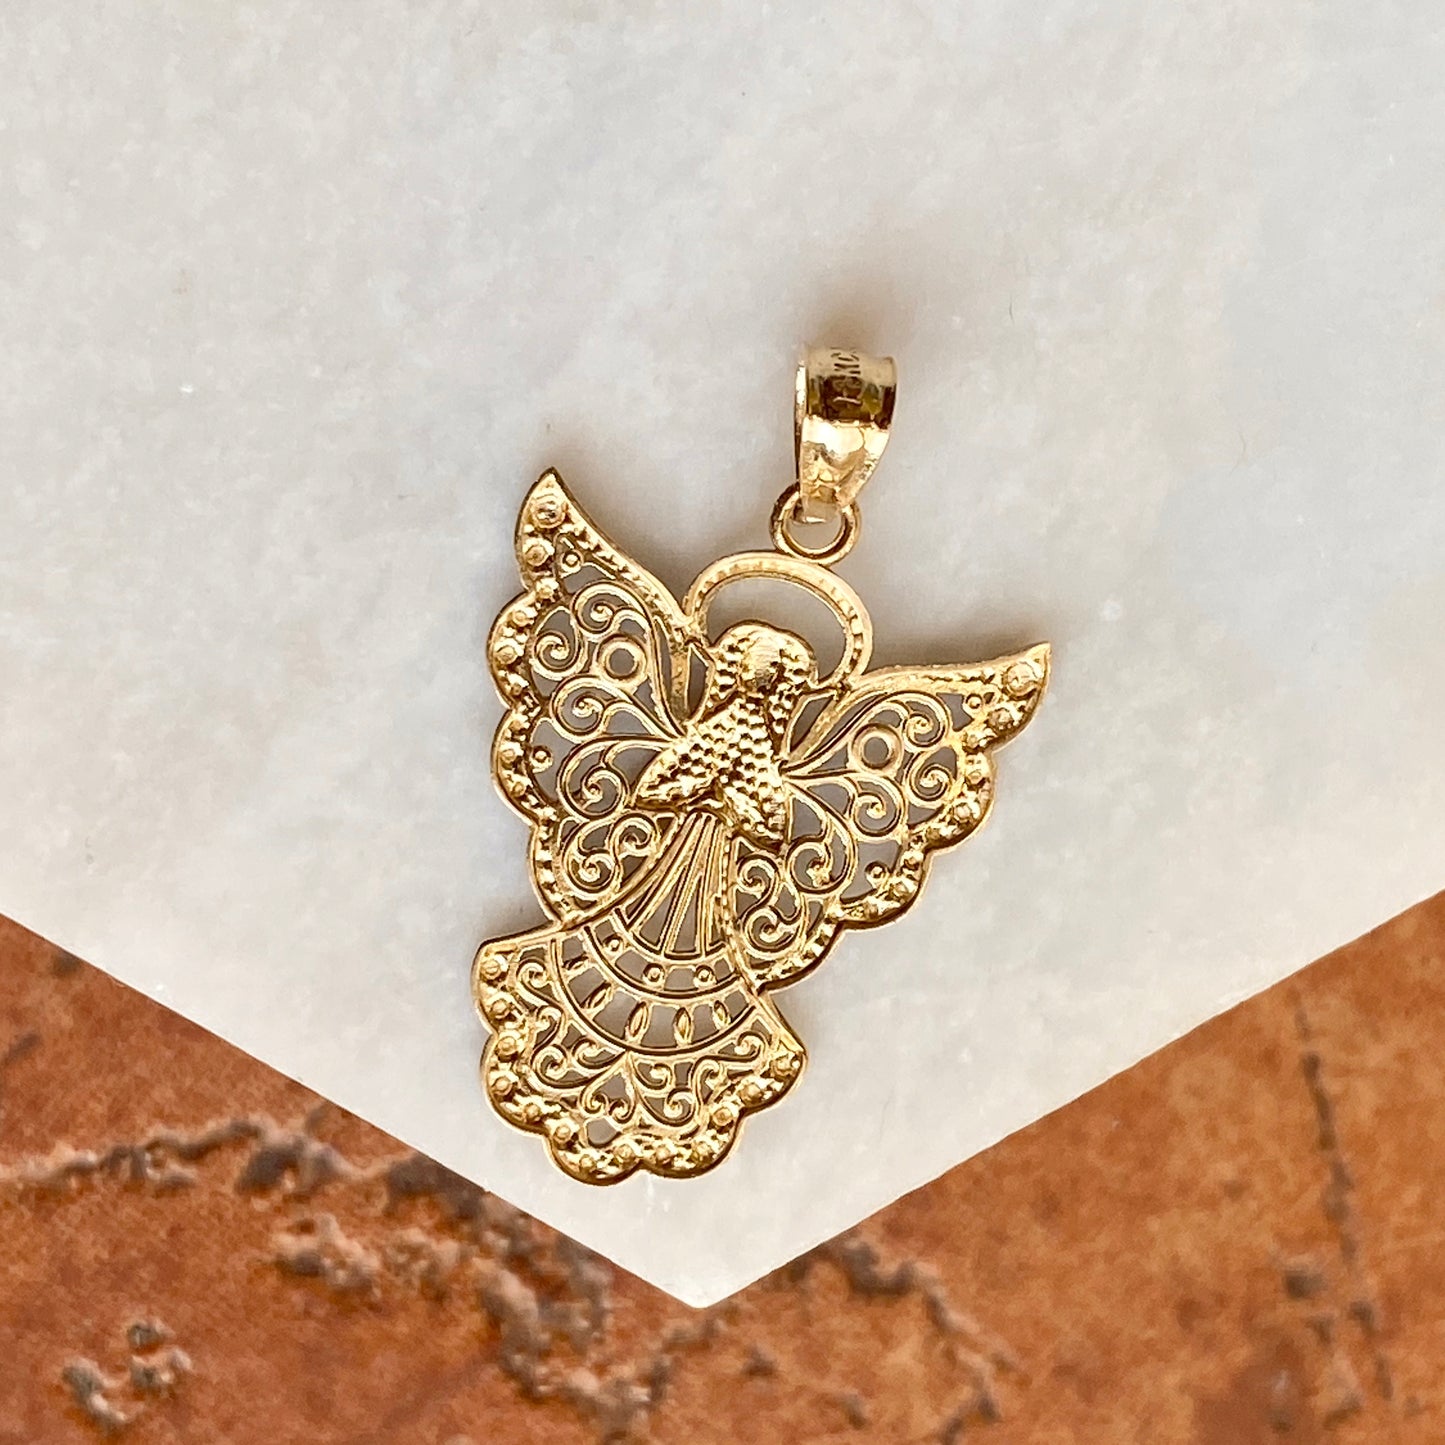 Two-Tone 14KT Yellow Gold + White Rhodium Filigree Guardian Angel Pendant Chain Necklace, Two-Tone 14KT Yellow Gold + White Rhodium Filigree Guardian Angel Pendant Chain Necklace - Legacy Saint Jewelry